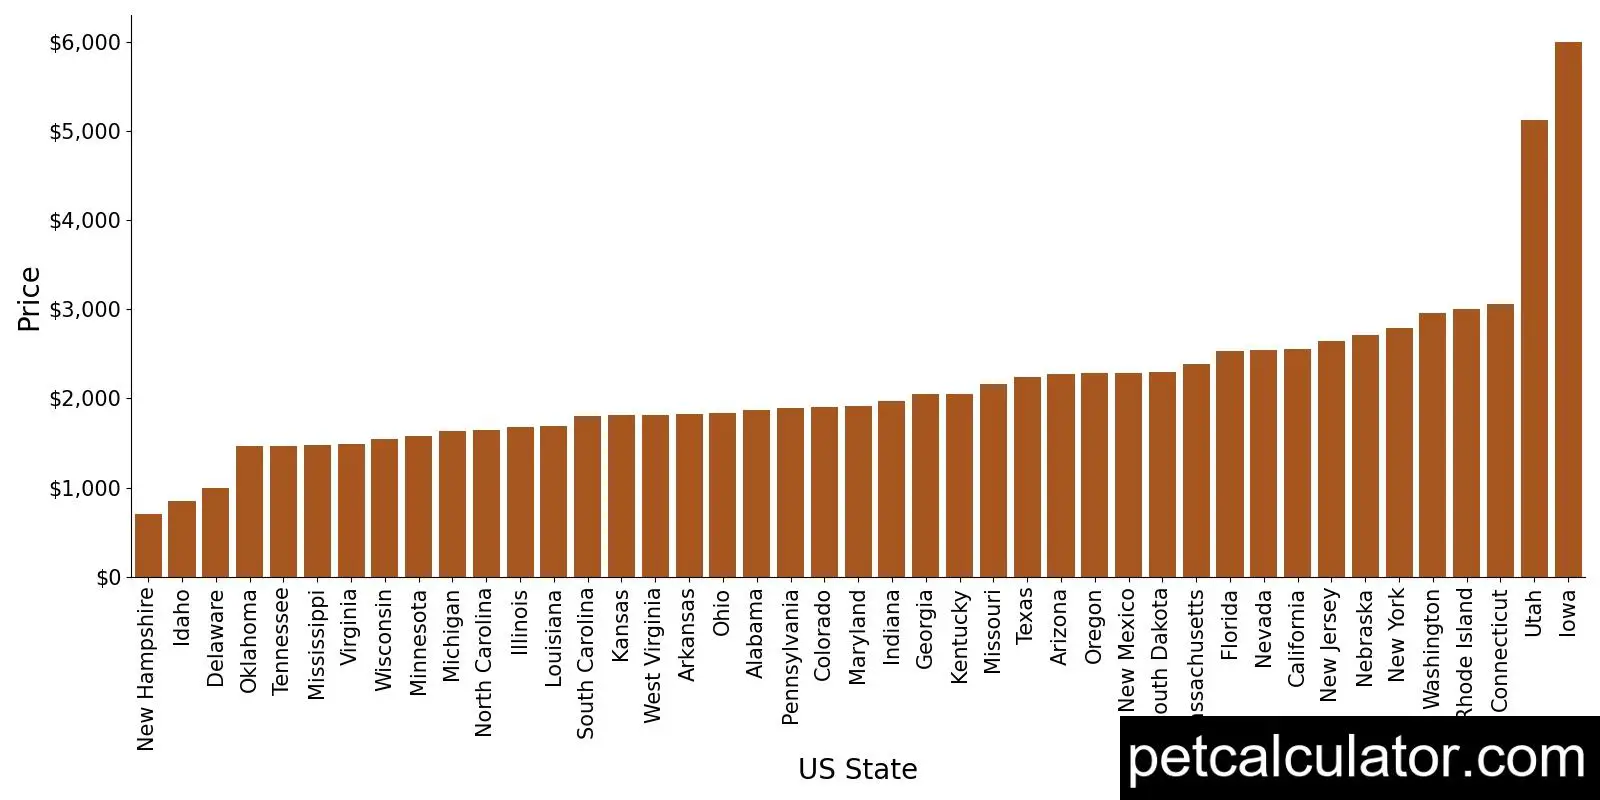 Price of Pomeranian by US State 